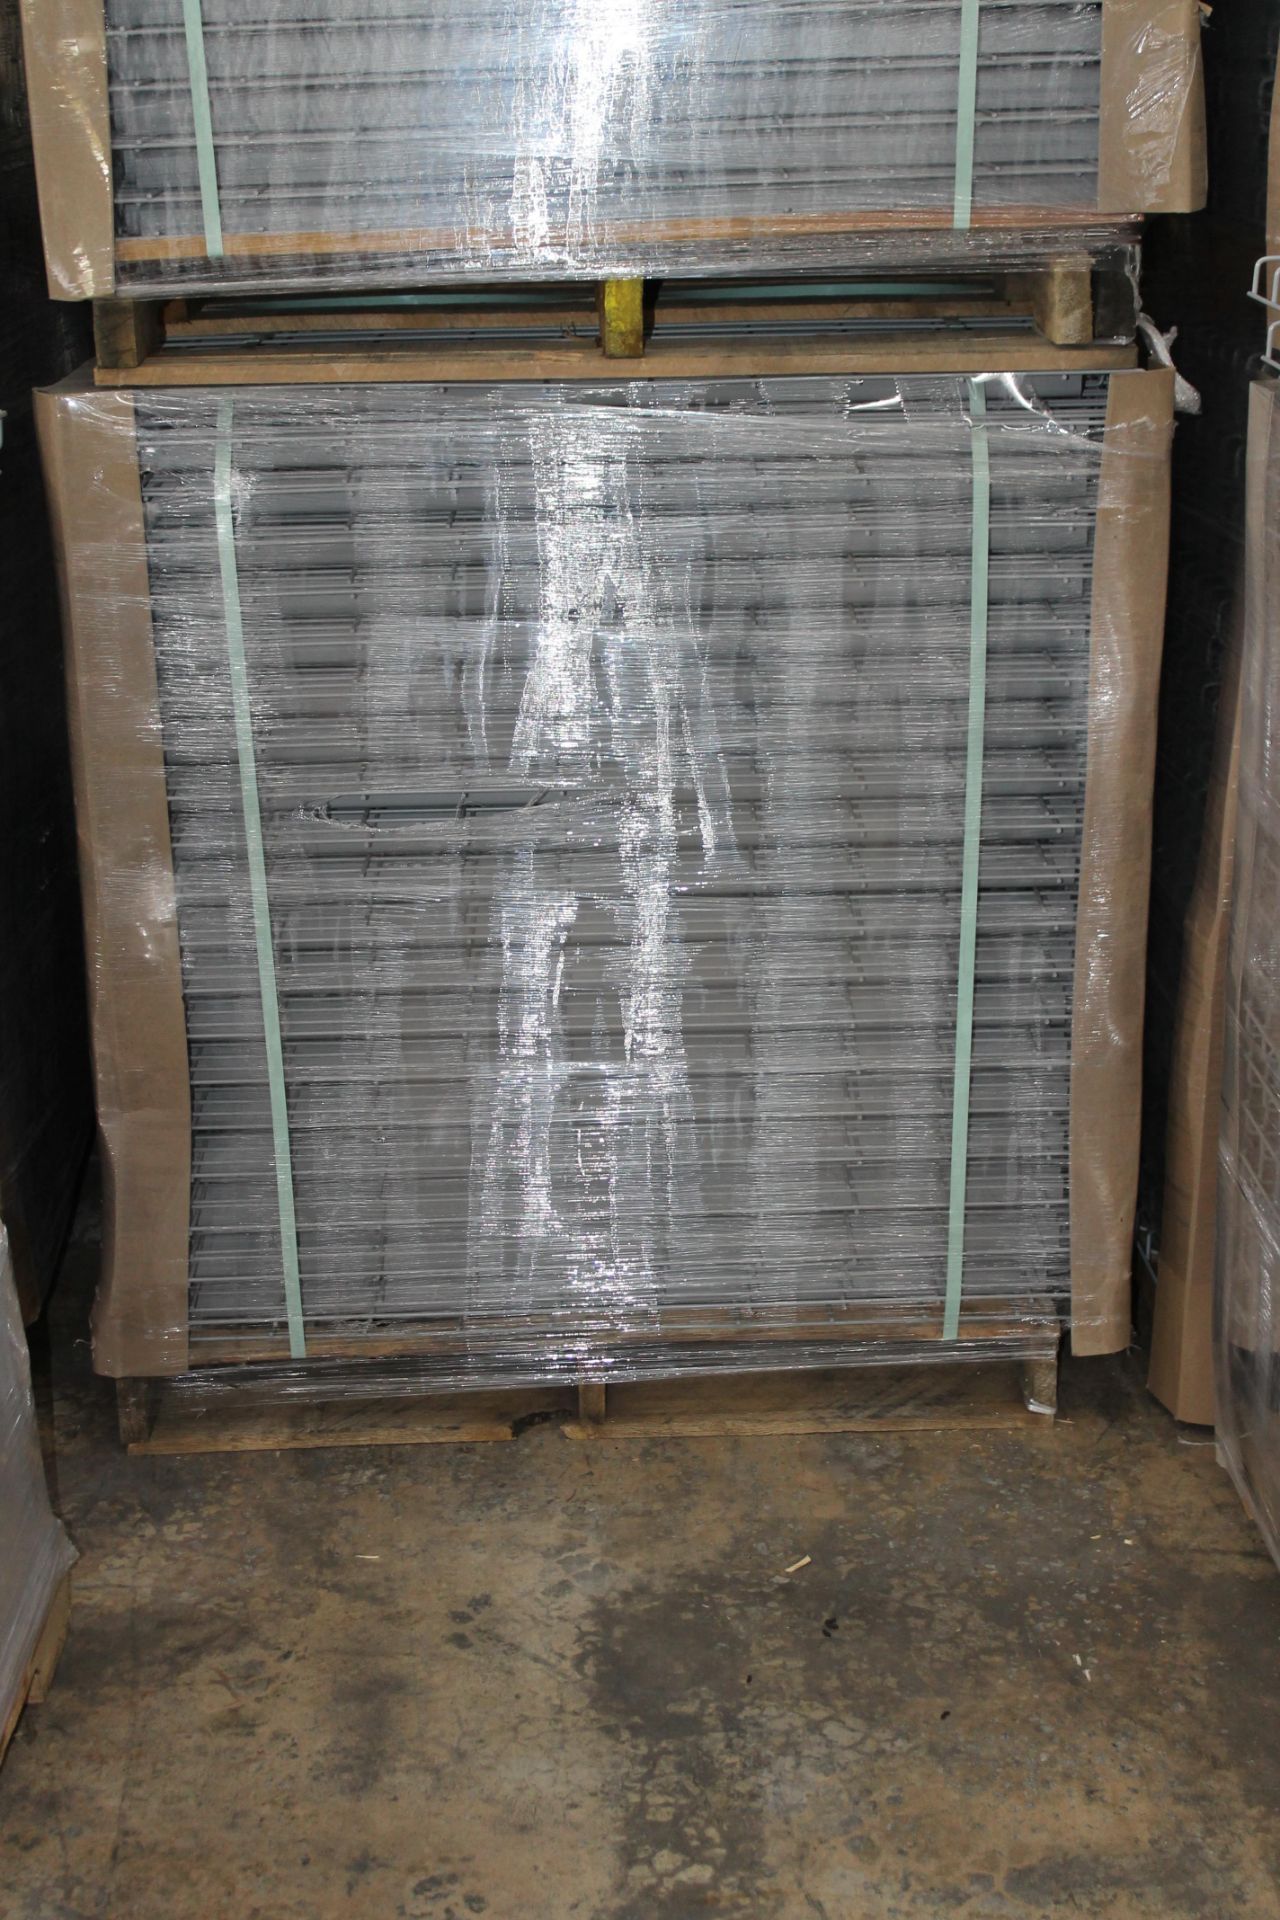 NEW 40 PCS OF STANDARD 36" X 46" WIREDECK - 2700 LBS CAPACITY